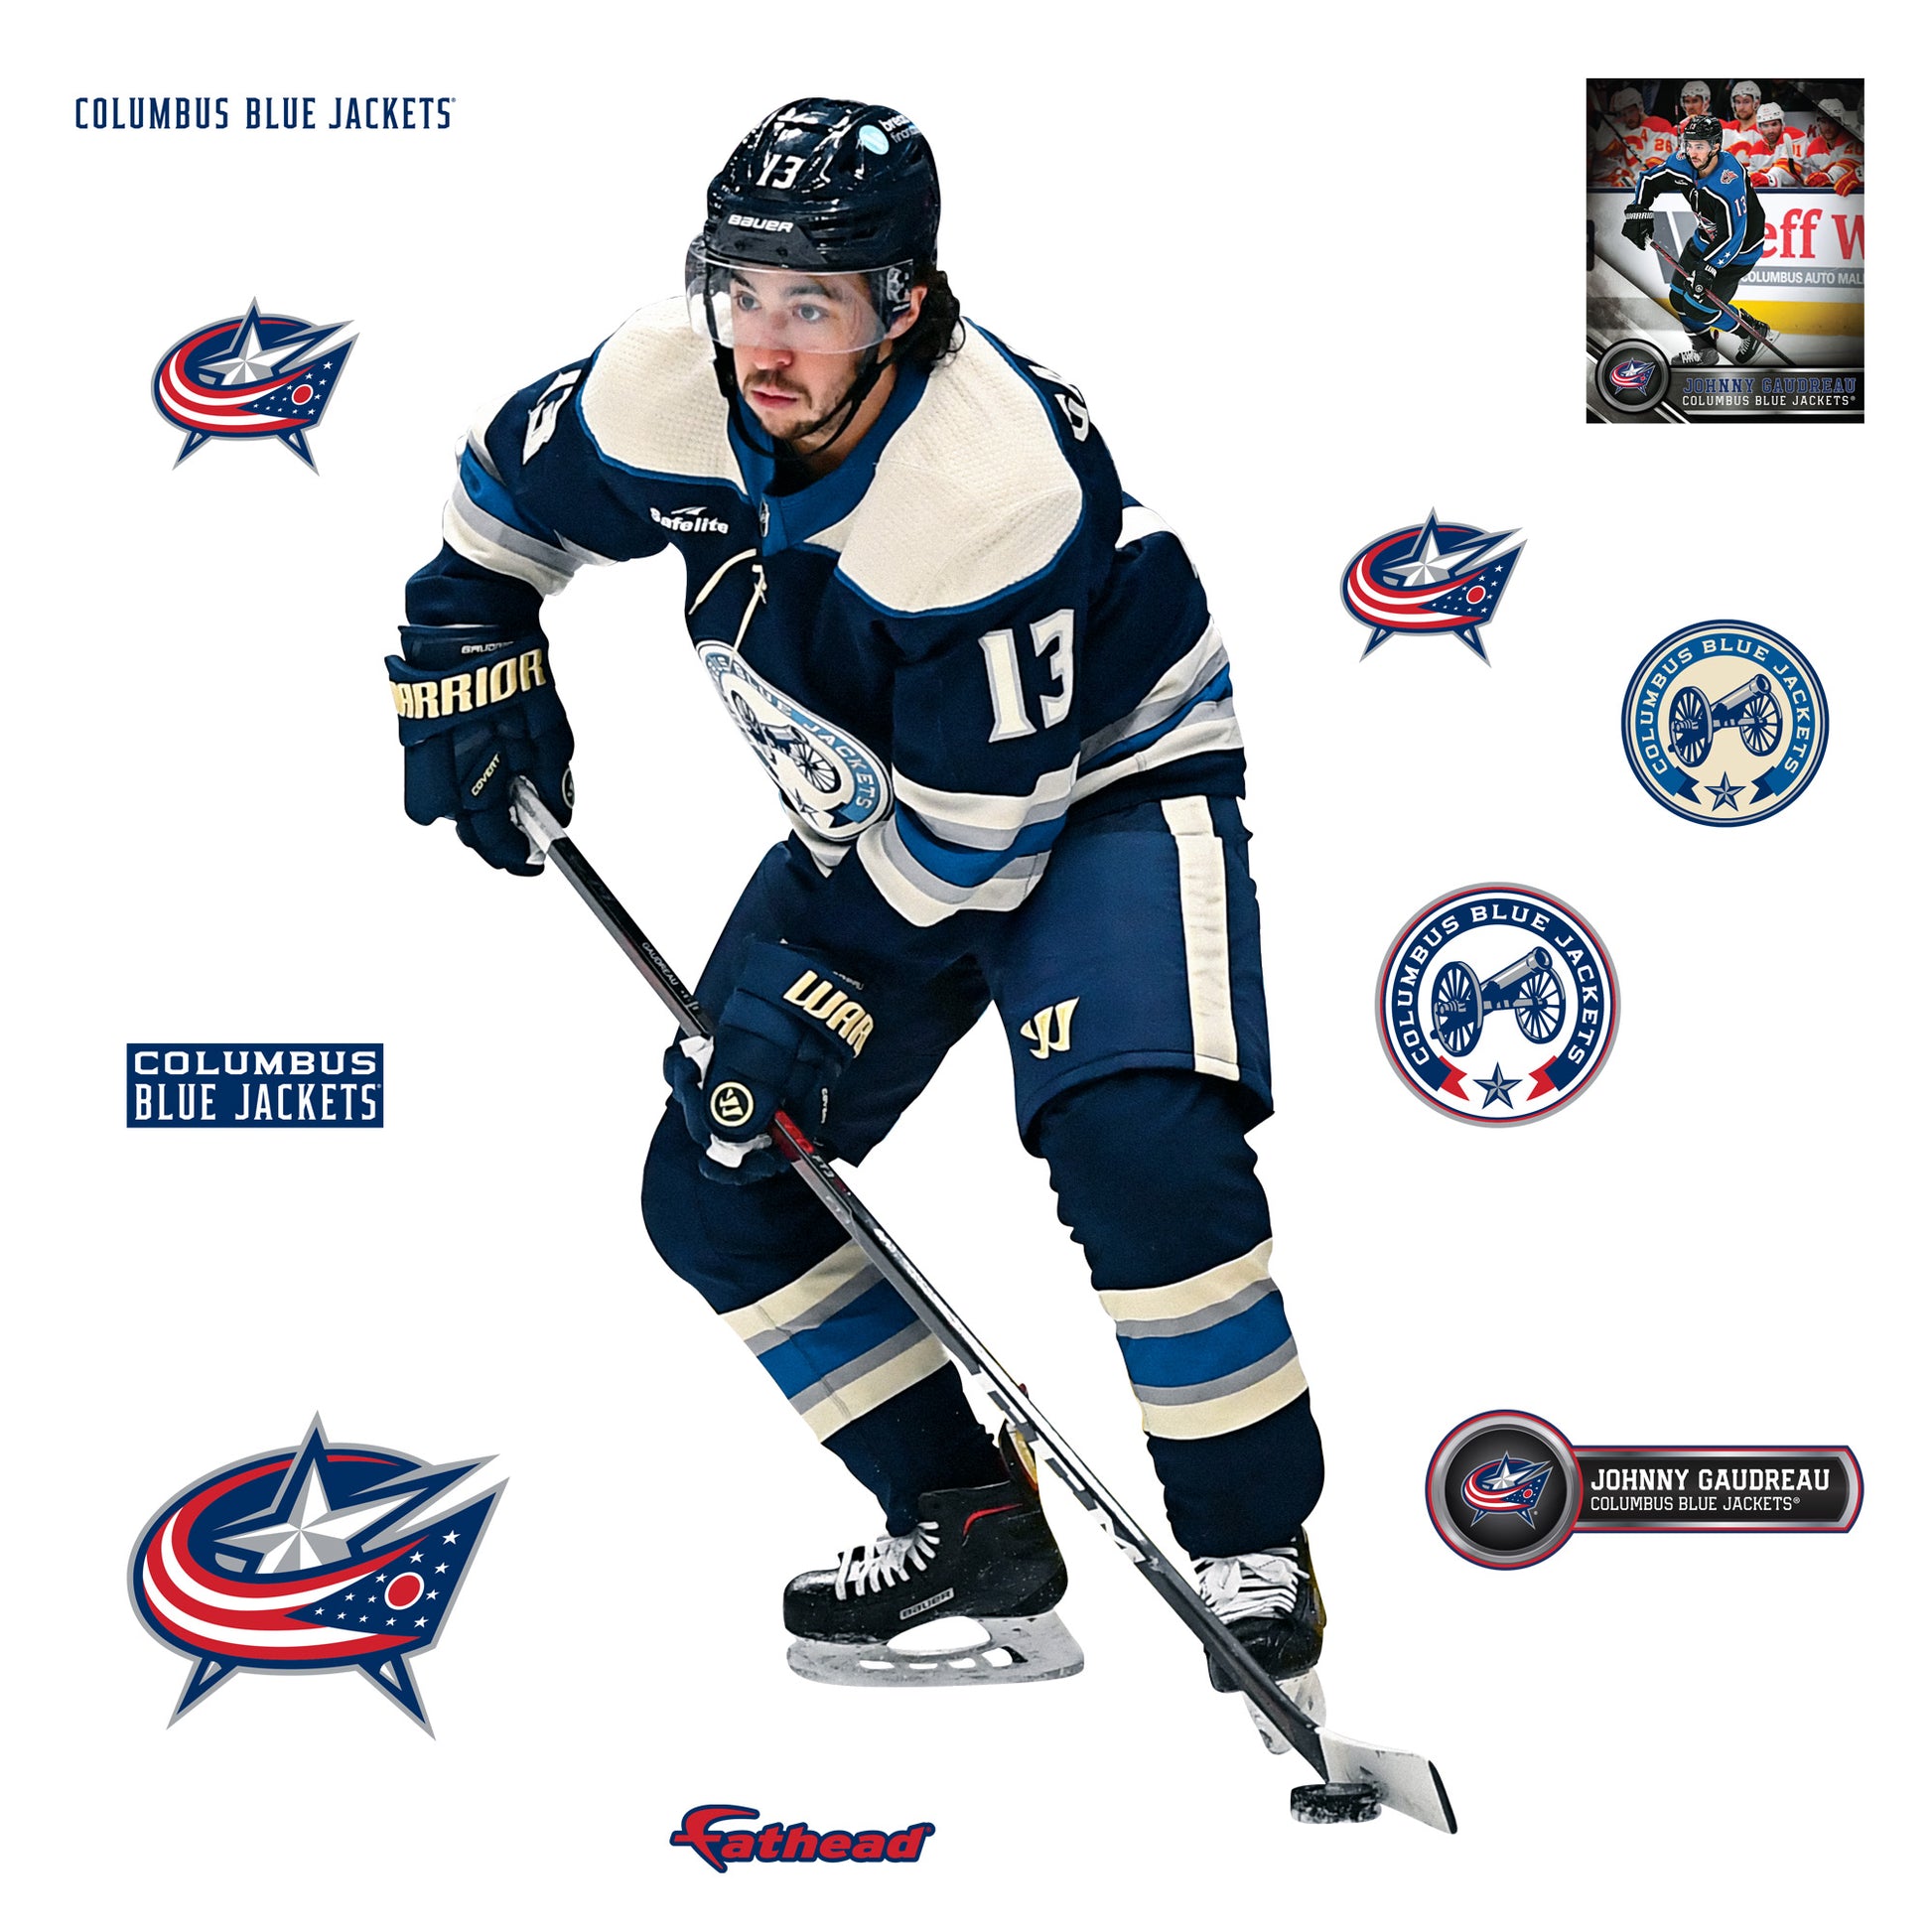 Did Johnny Gaudreau Choose Columbus, Or The Blue Jackets?